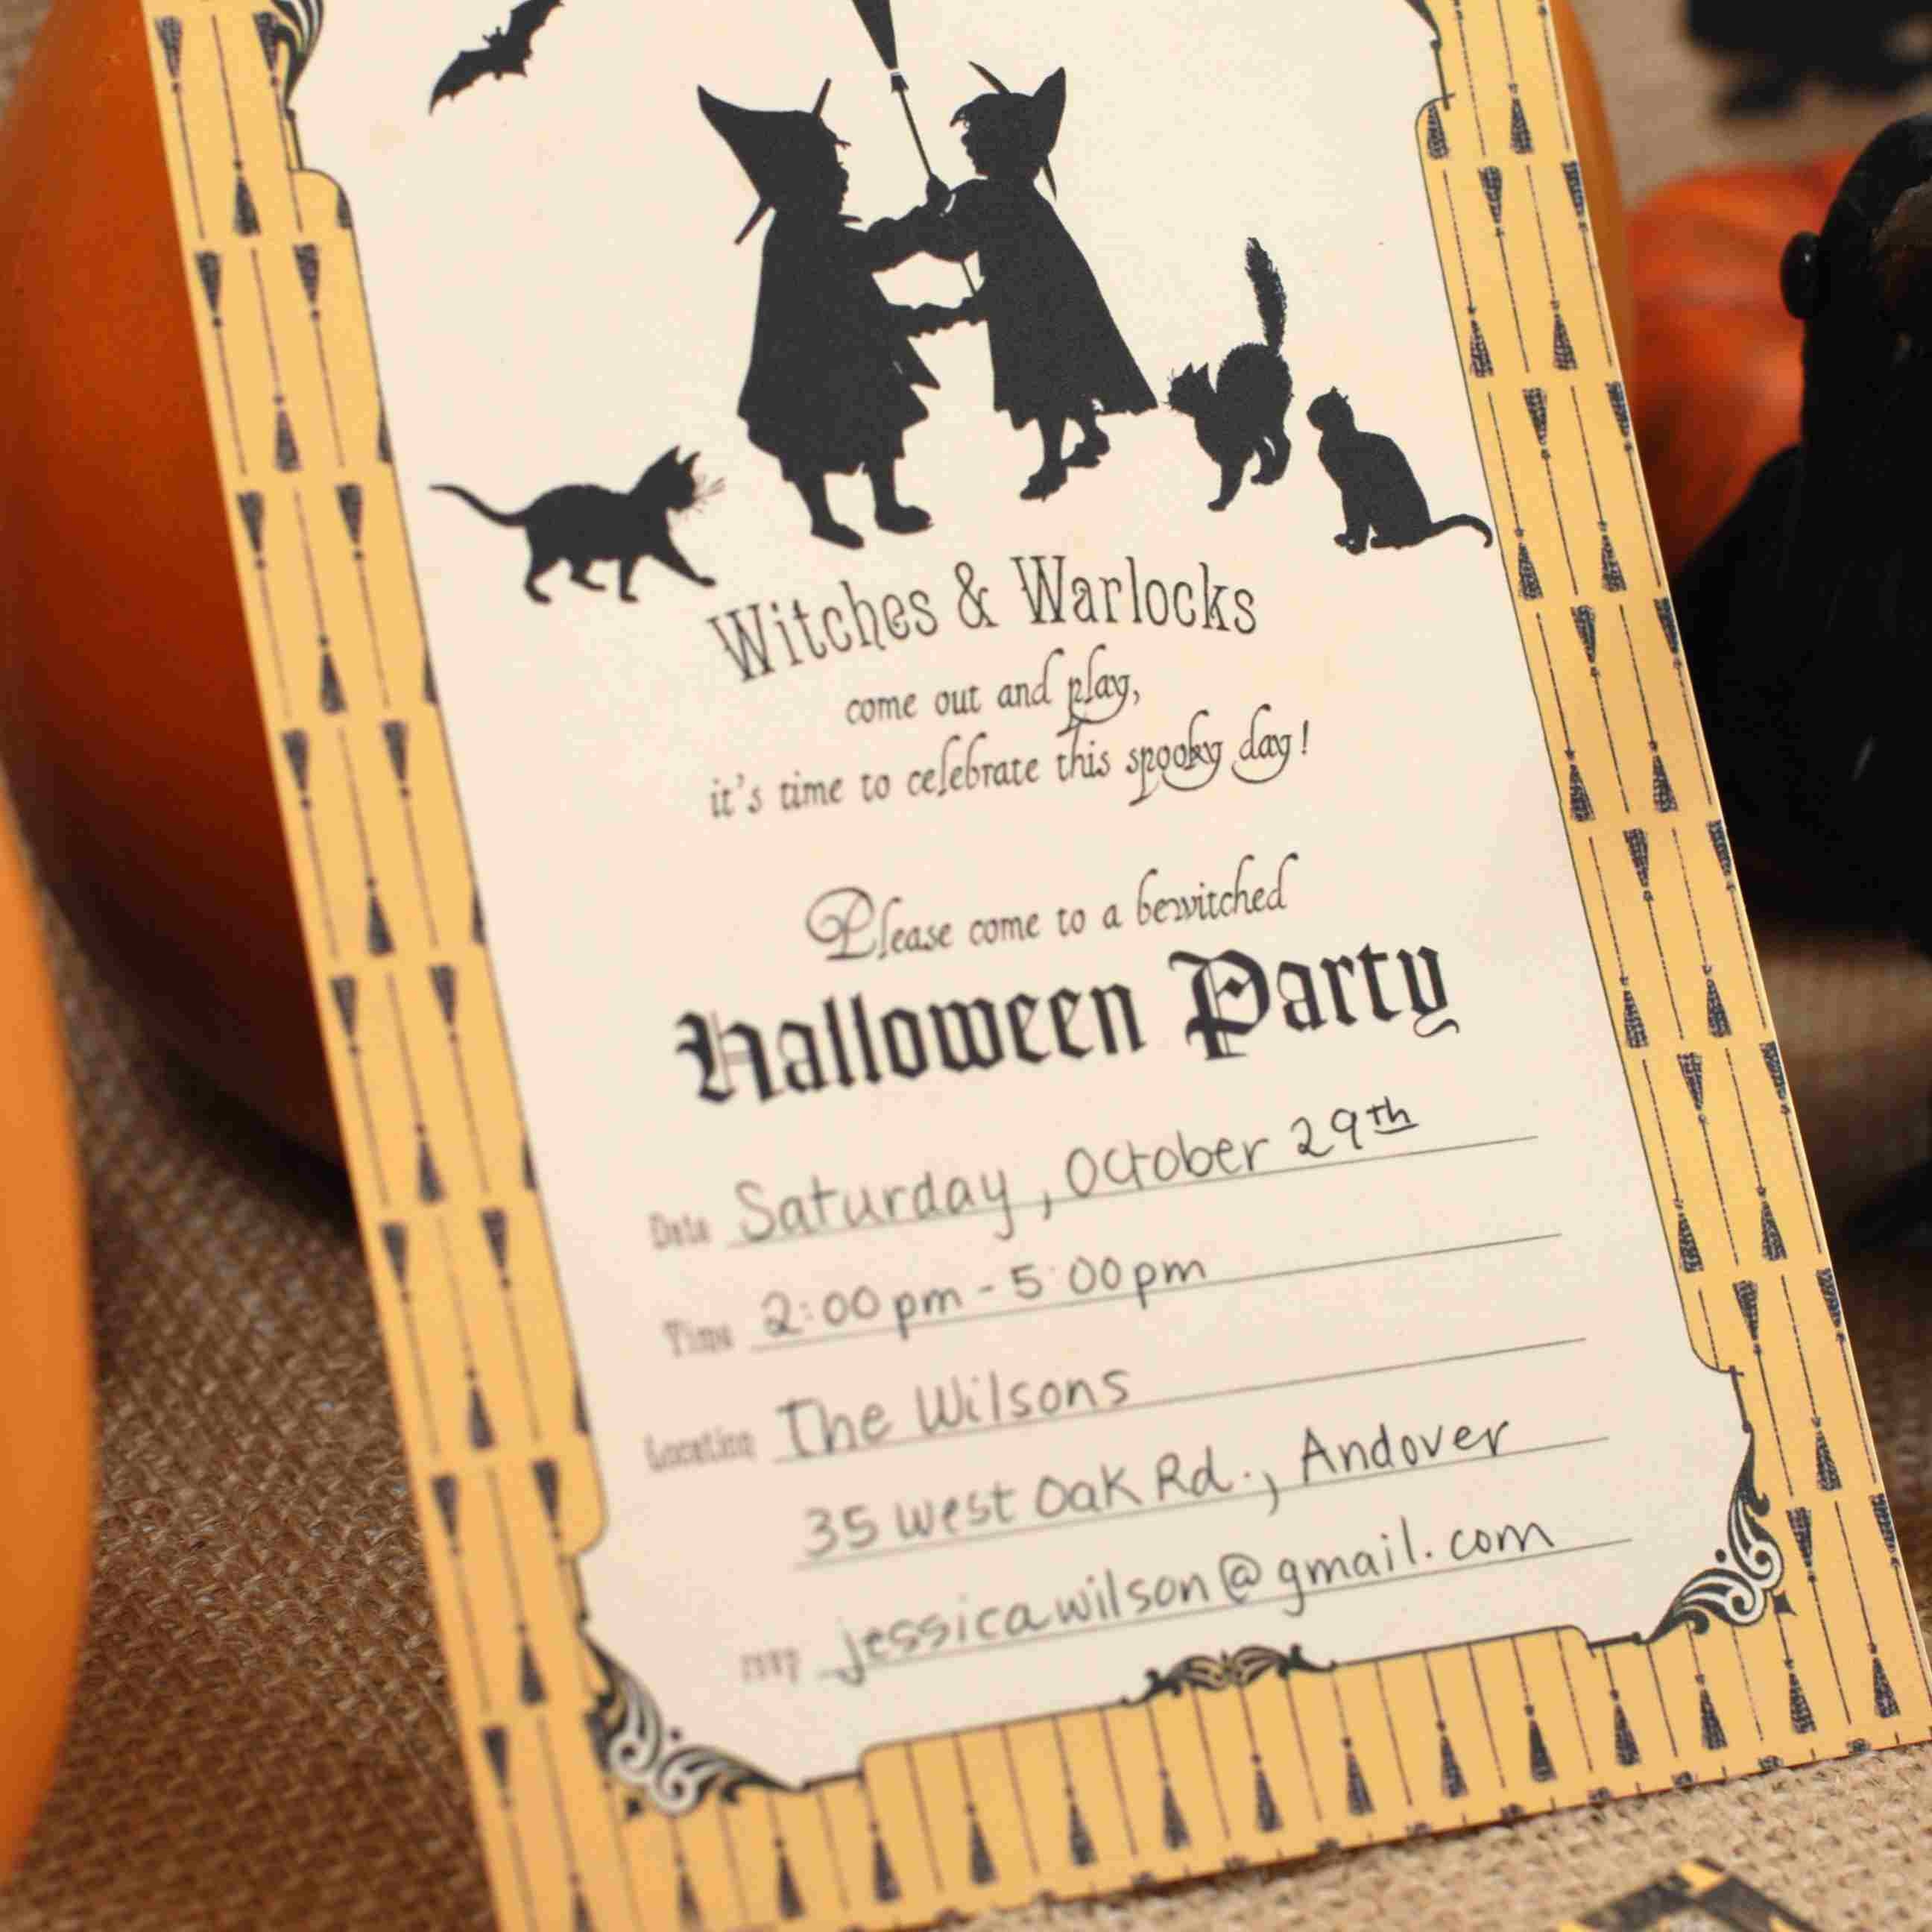 17 Free Halloween Invitations You Can Print From Home - Free Online Halloween Invitations Printable